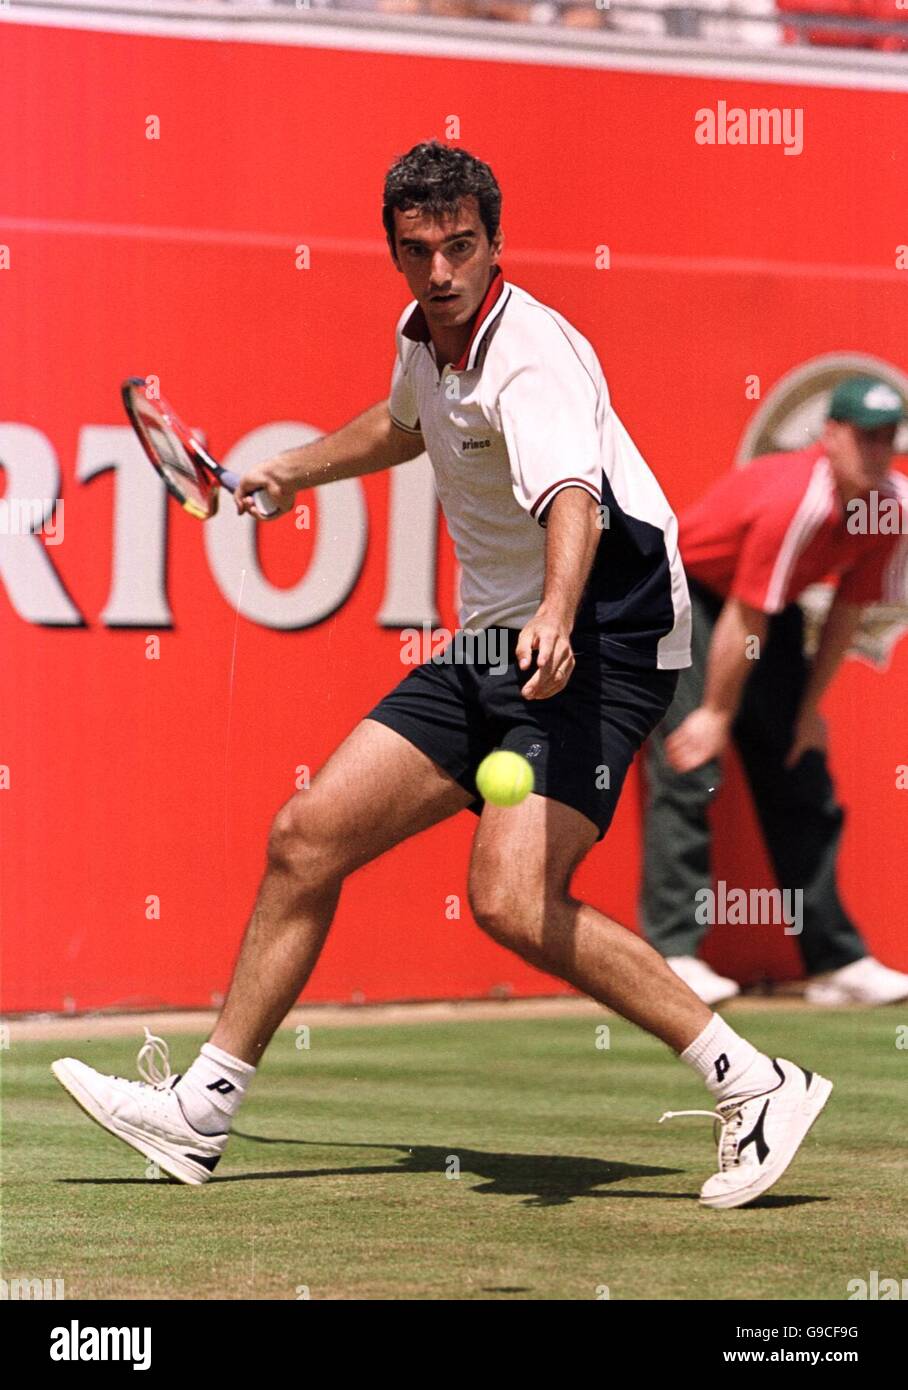 Davide Sanguinetti returns a ball during his fruitless match against the defending champion, Pete Sampras Stock Photo